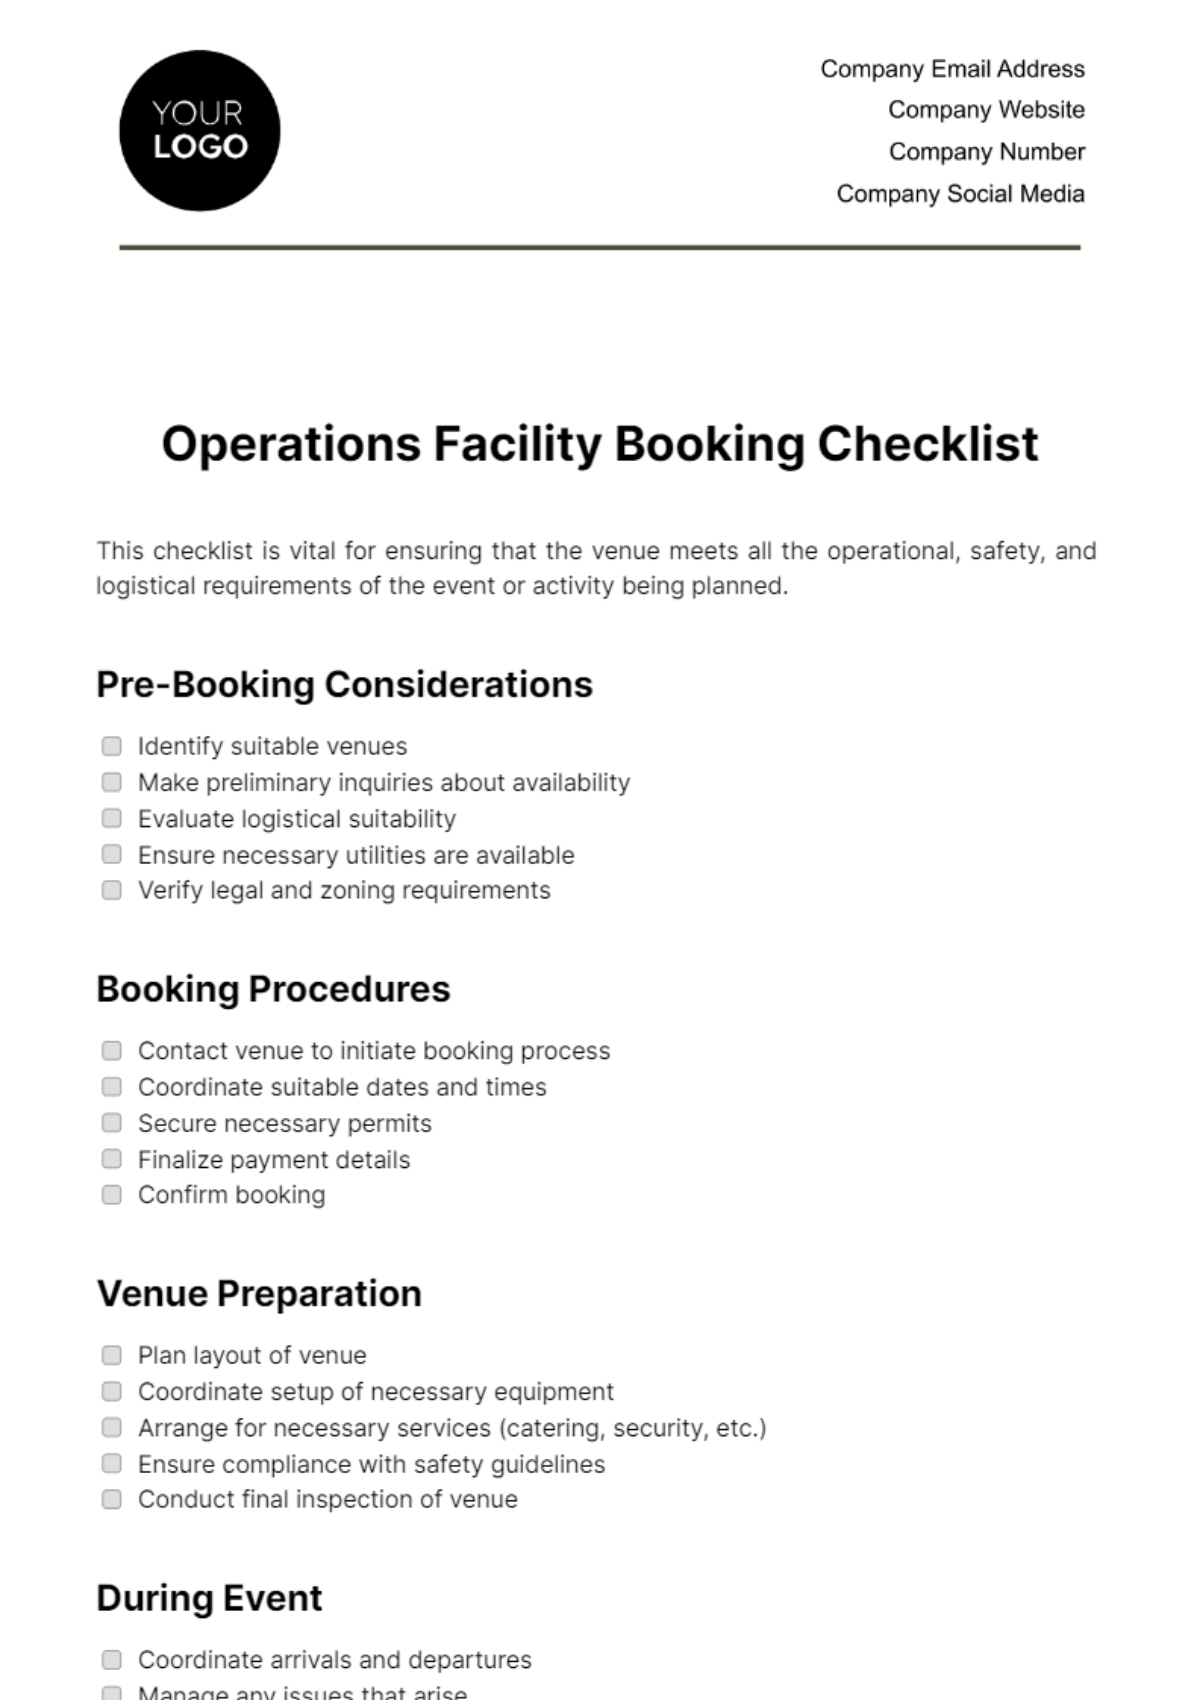 Operations Facility Booking Checklist Template